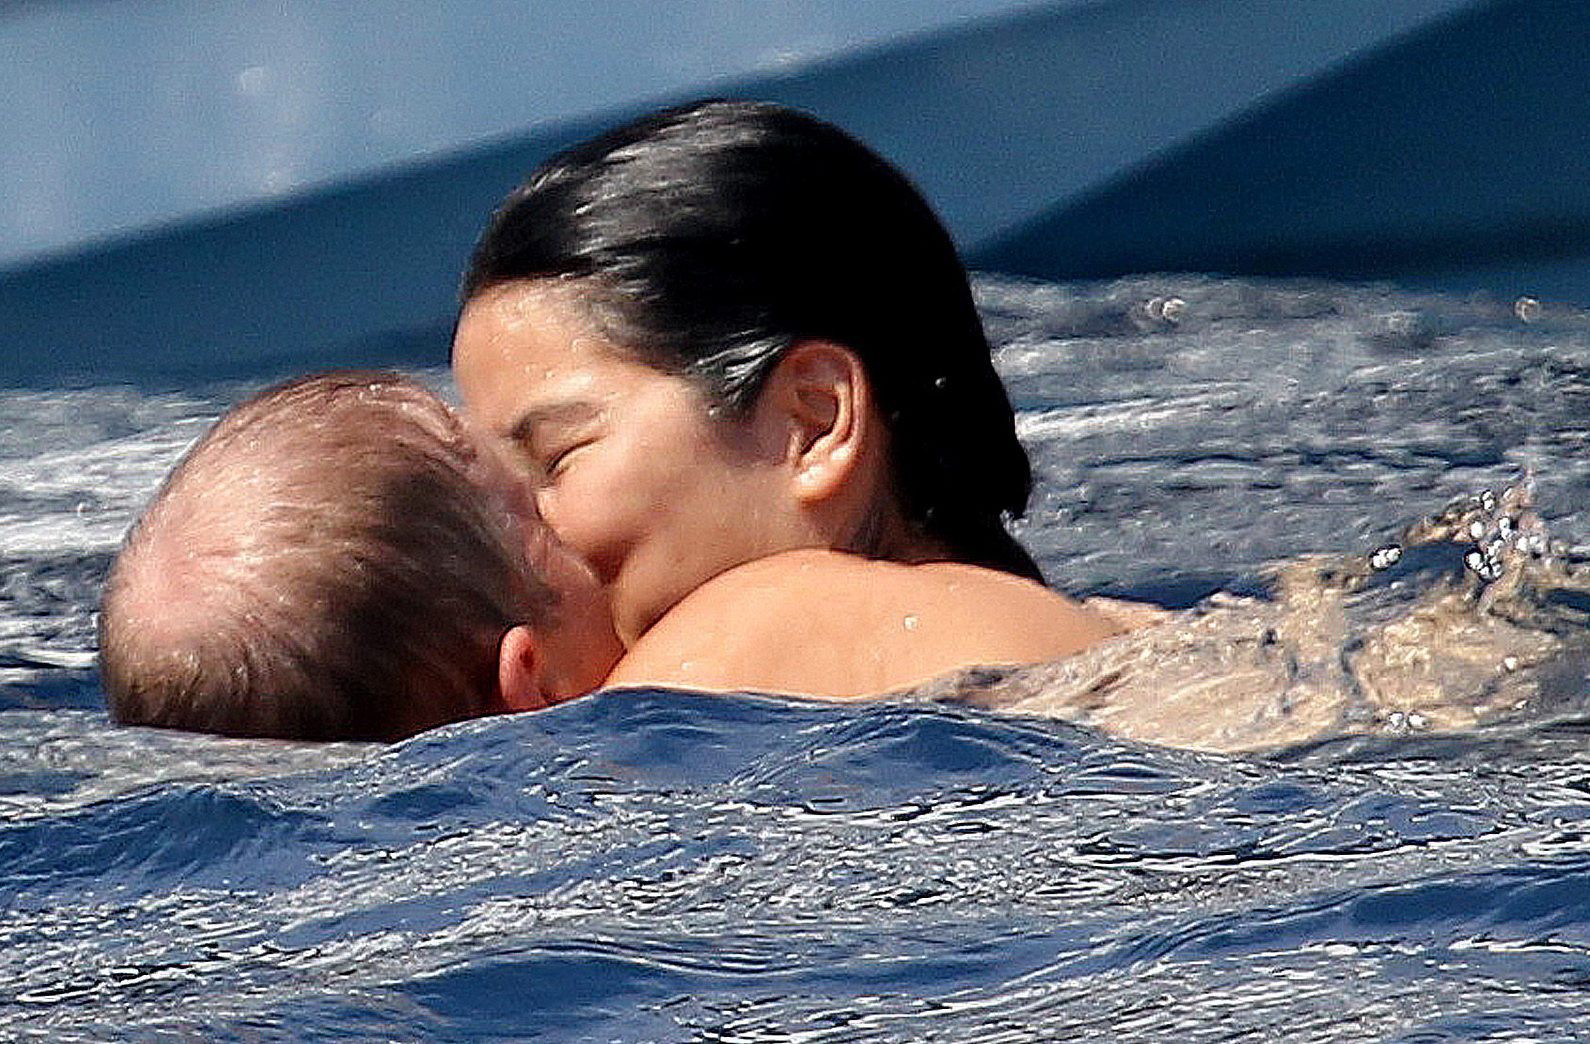 The Prince was spotted kissing a woman in the sea on a Corsica yacht holiday in 2011